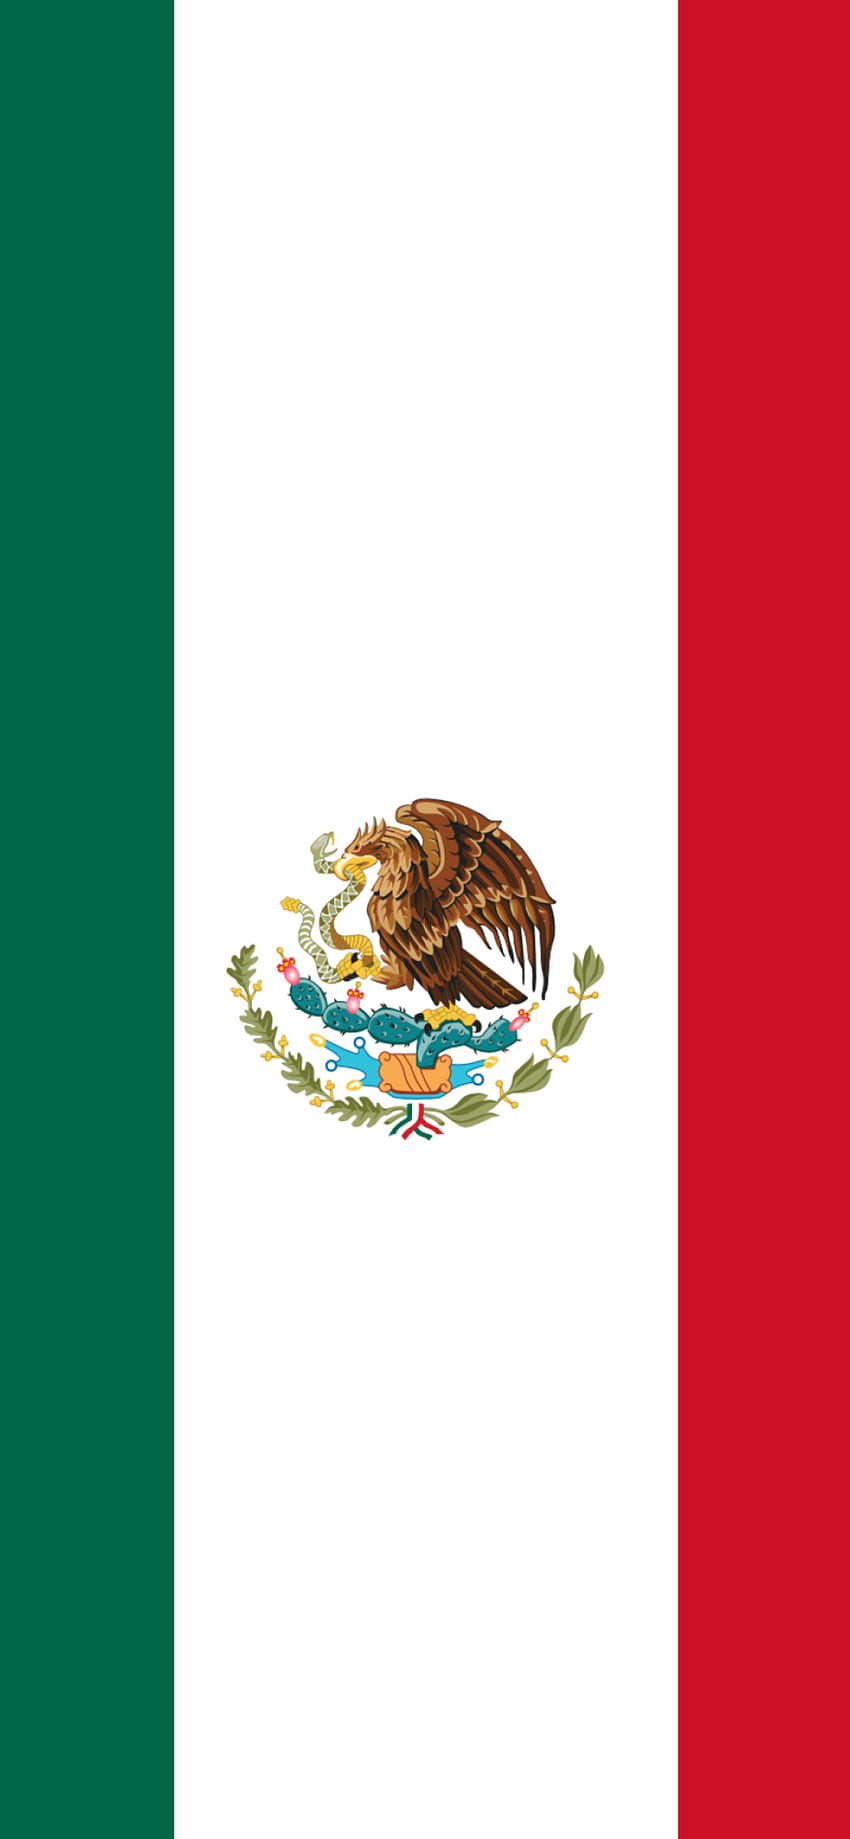 Details 61+ mexican flag wallpaper - in.cdgdbentre